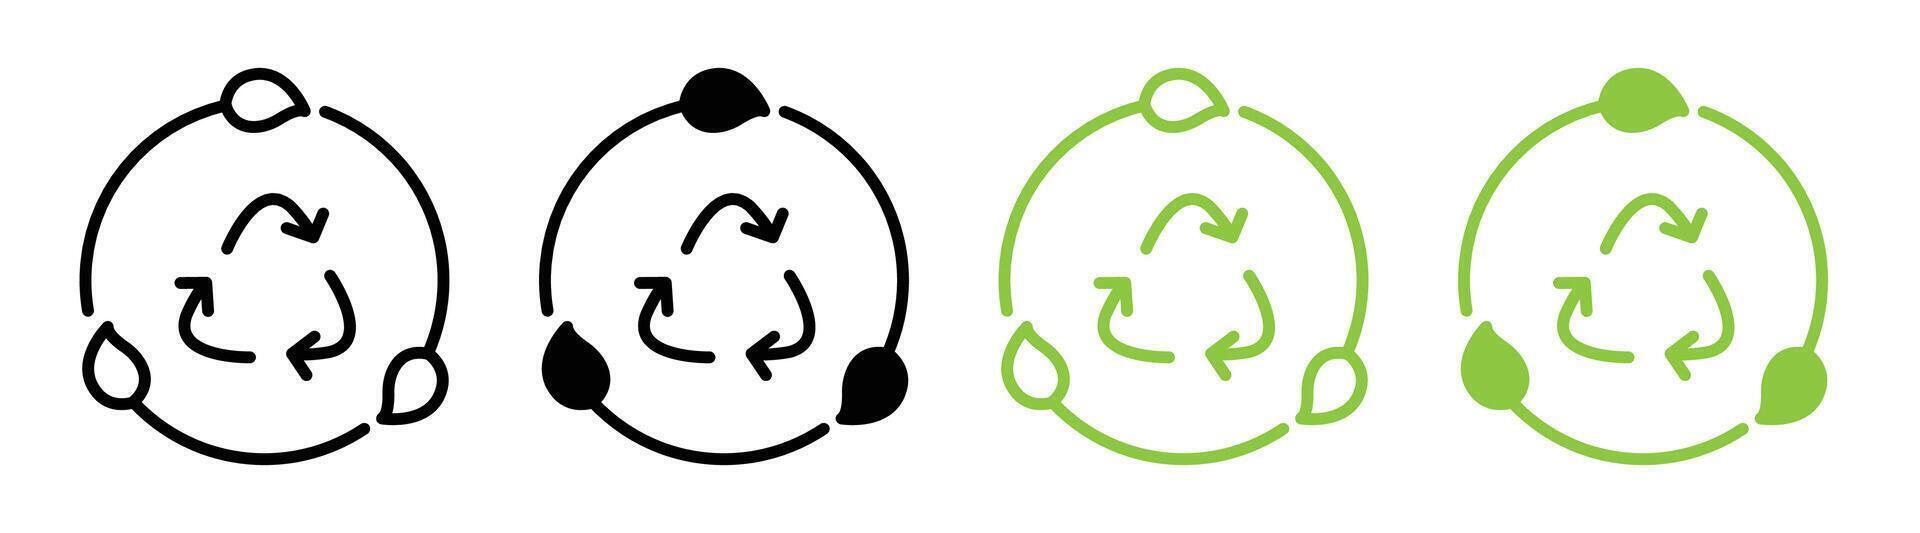 Leaves eco recycle icon vector